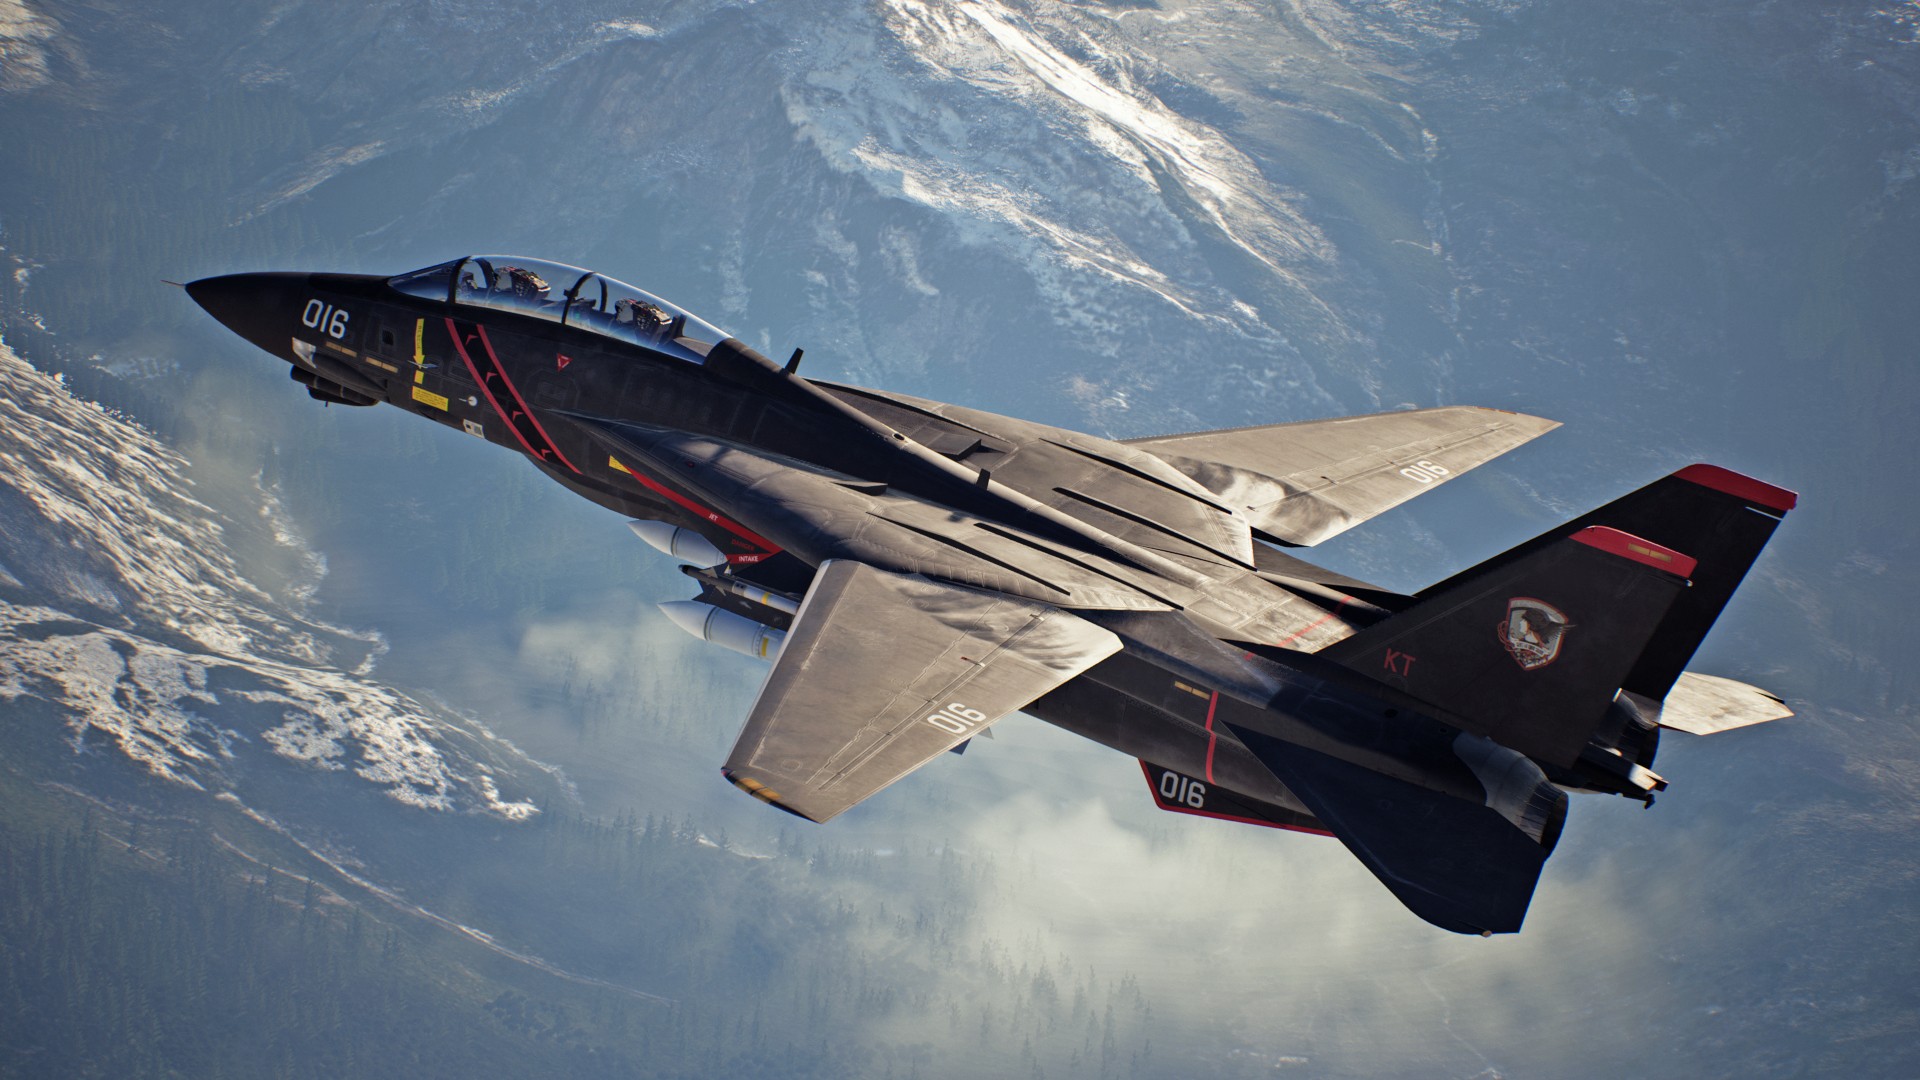 A free update for Ace Combat 7 adds new skins and classic Ace Combat music